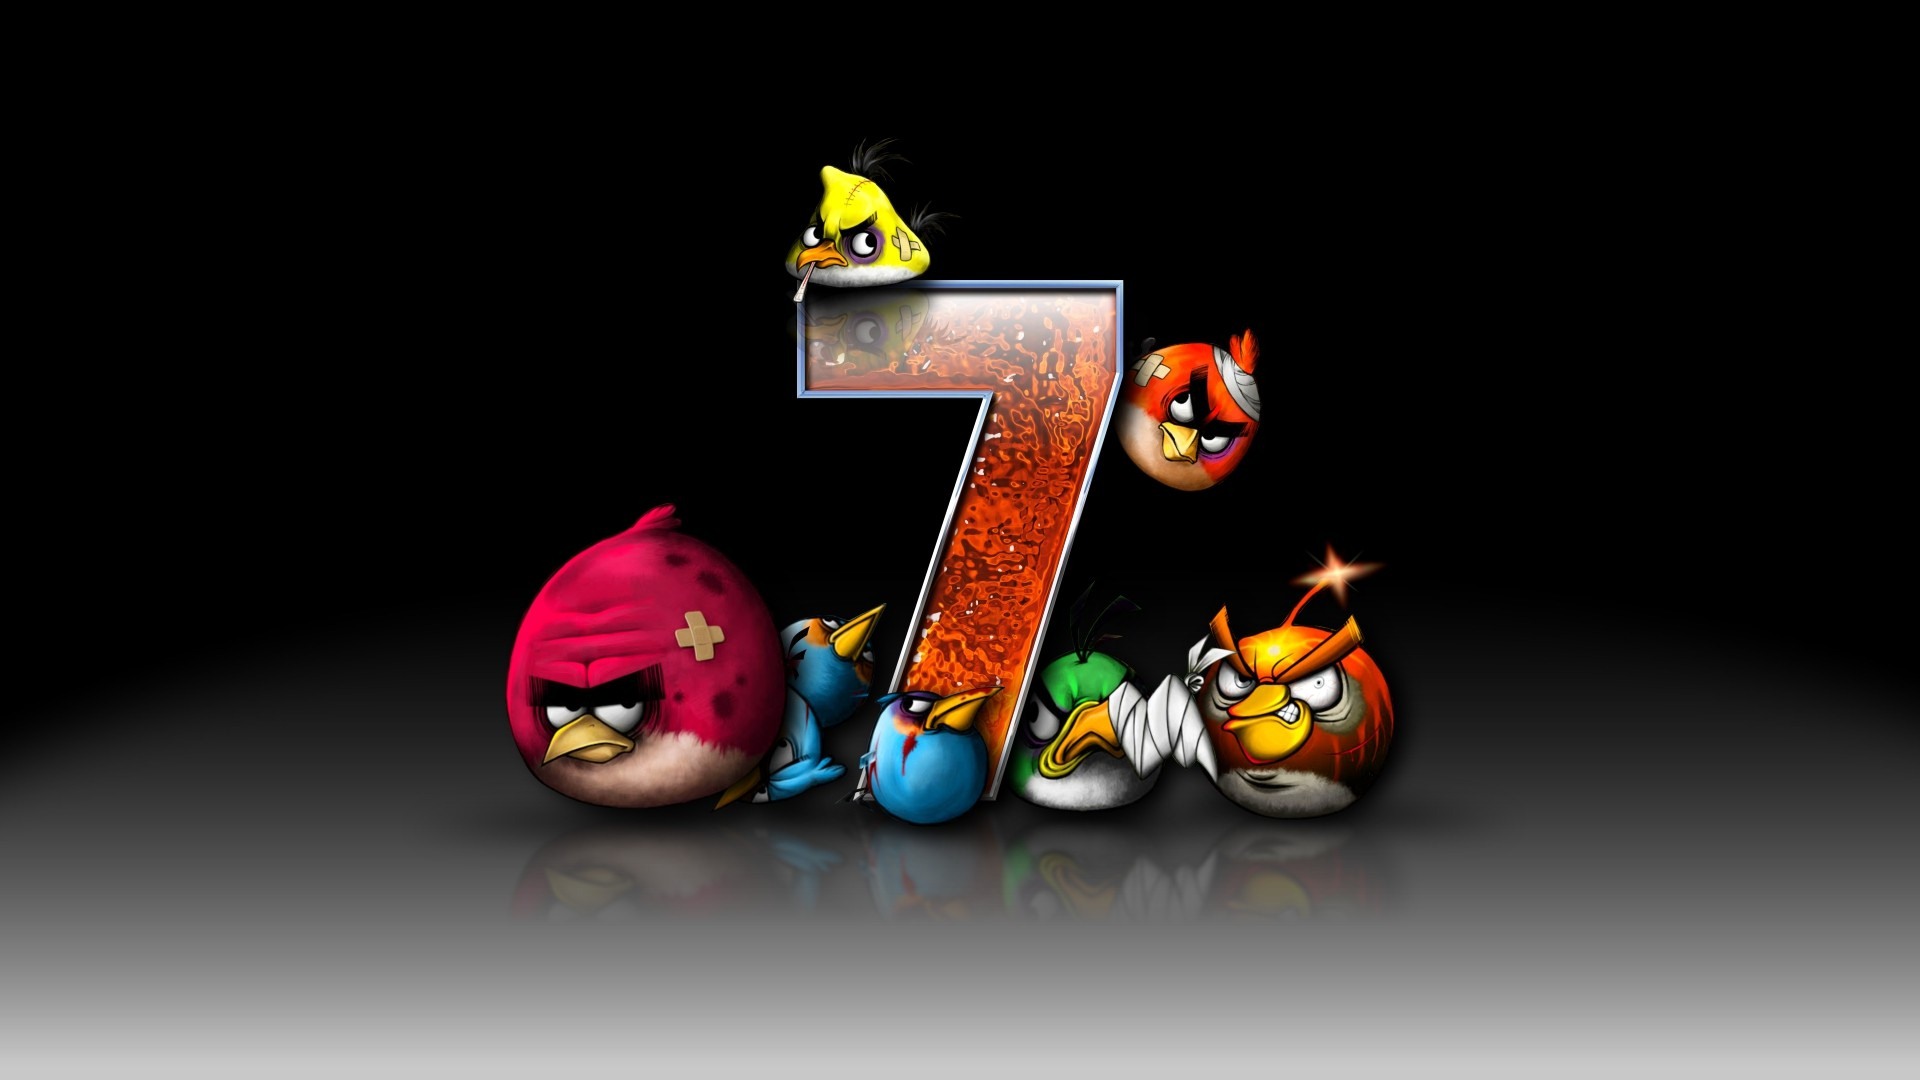 Angry Birds Spiel wallpapers #17 - 1920x1080